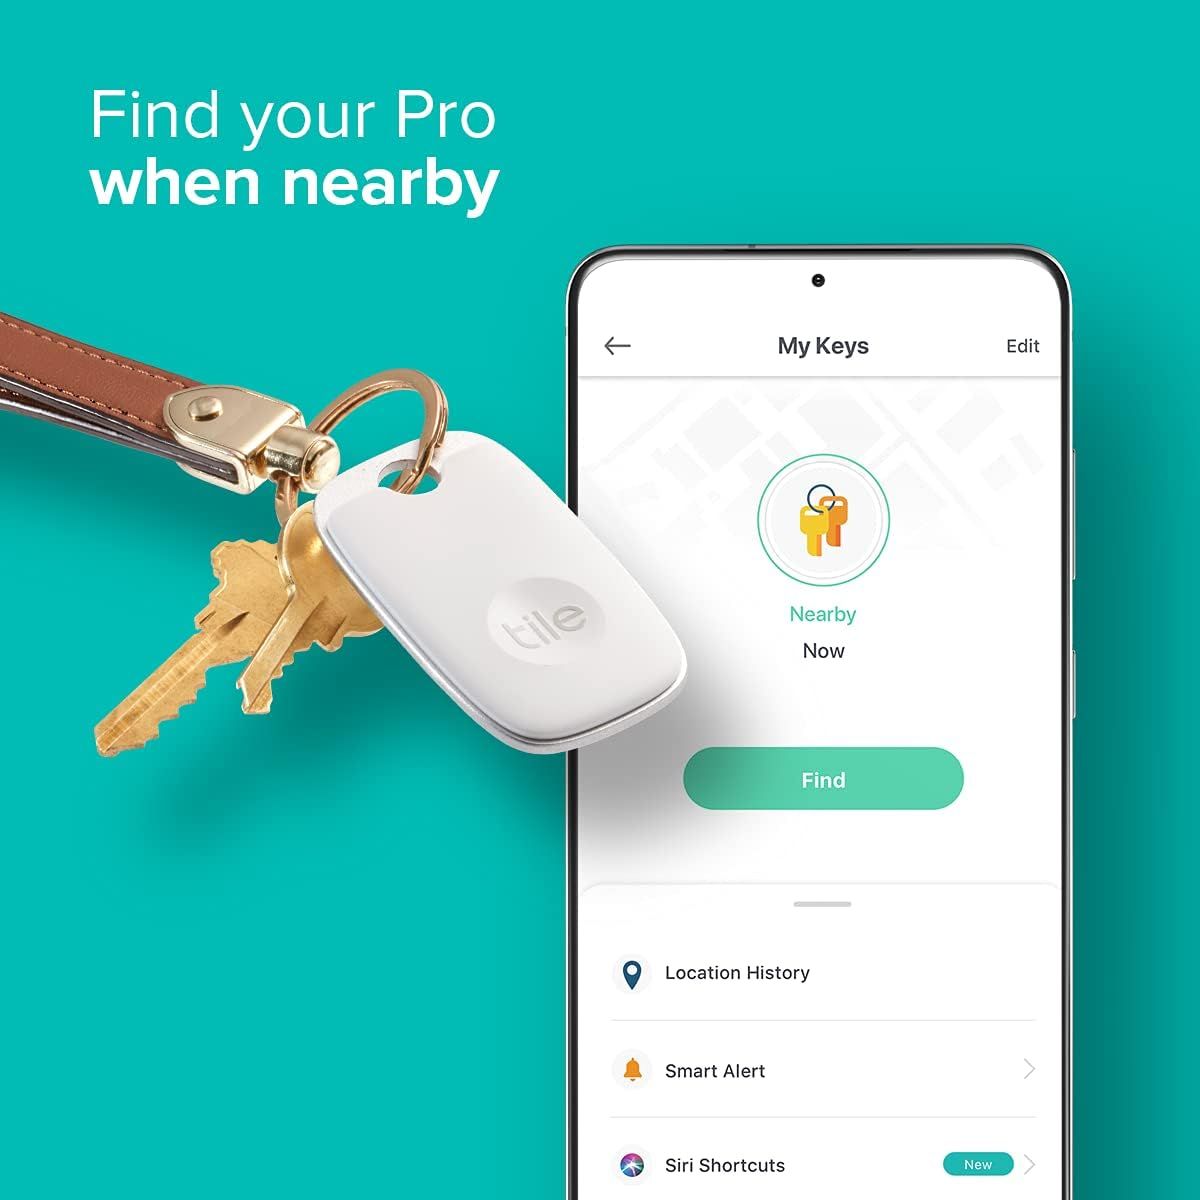 Tile Pro (2022) 4 Pack Powerful Bluetooth Tracker, Key Finder and